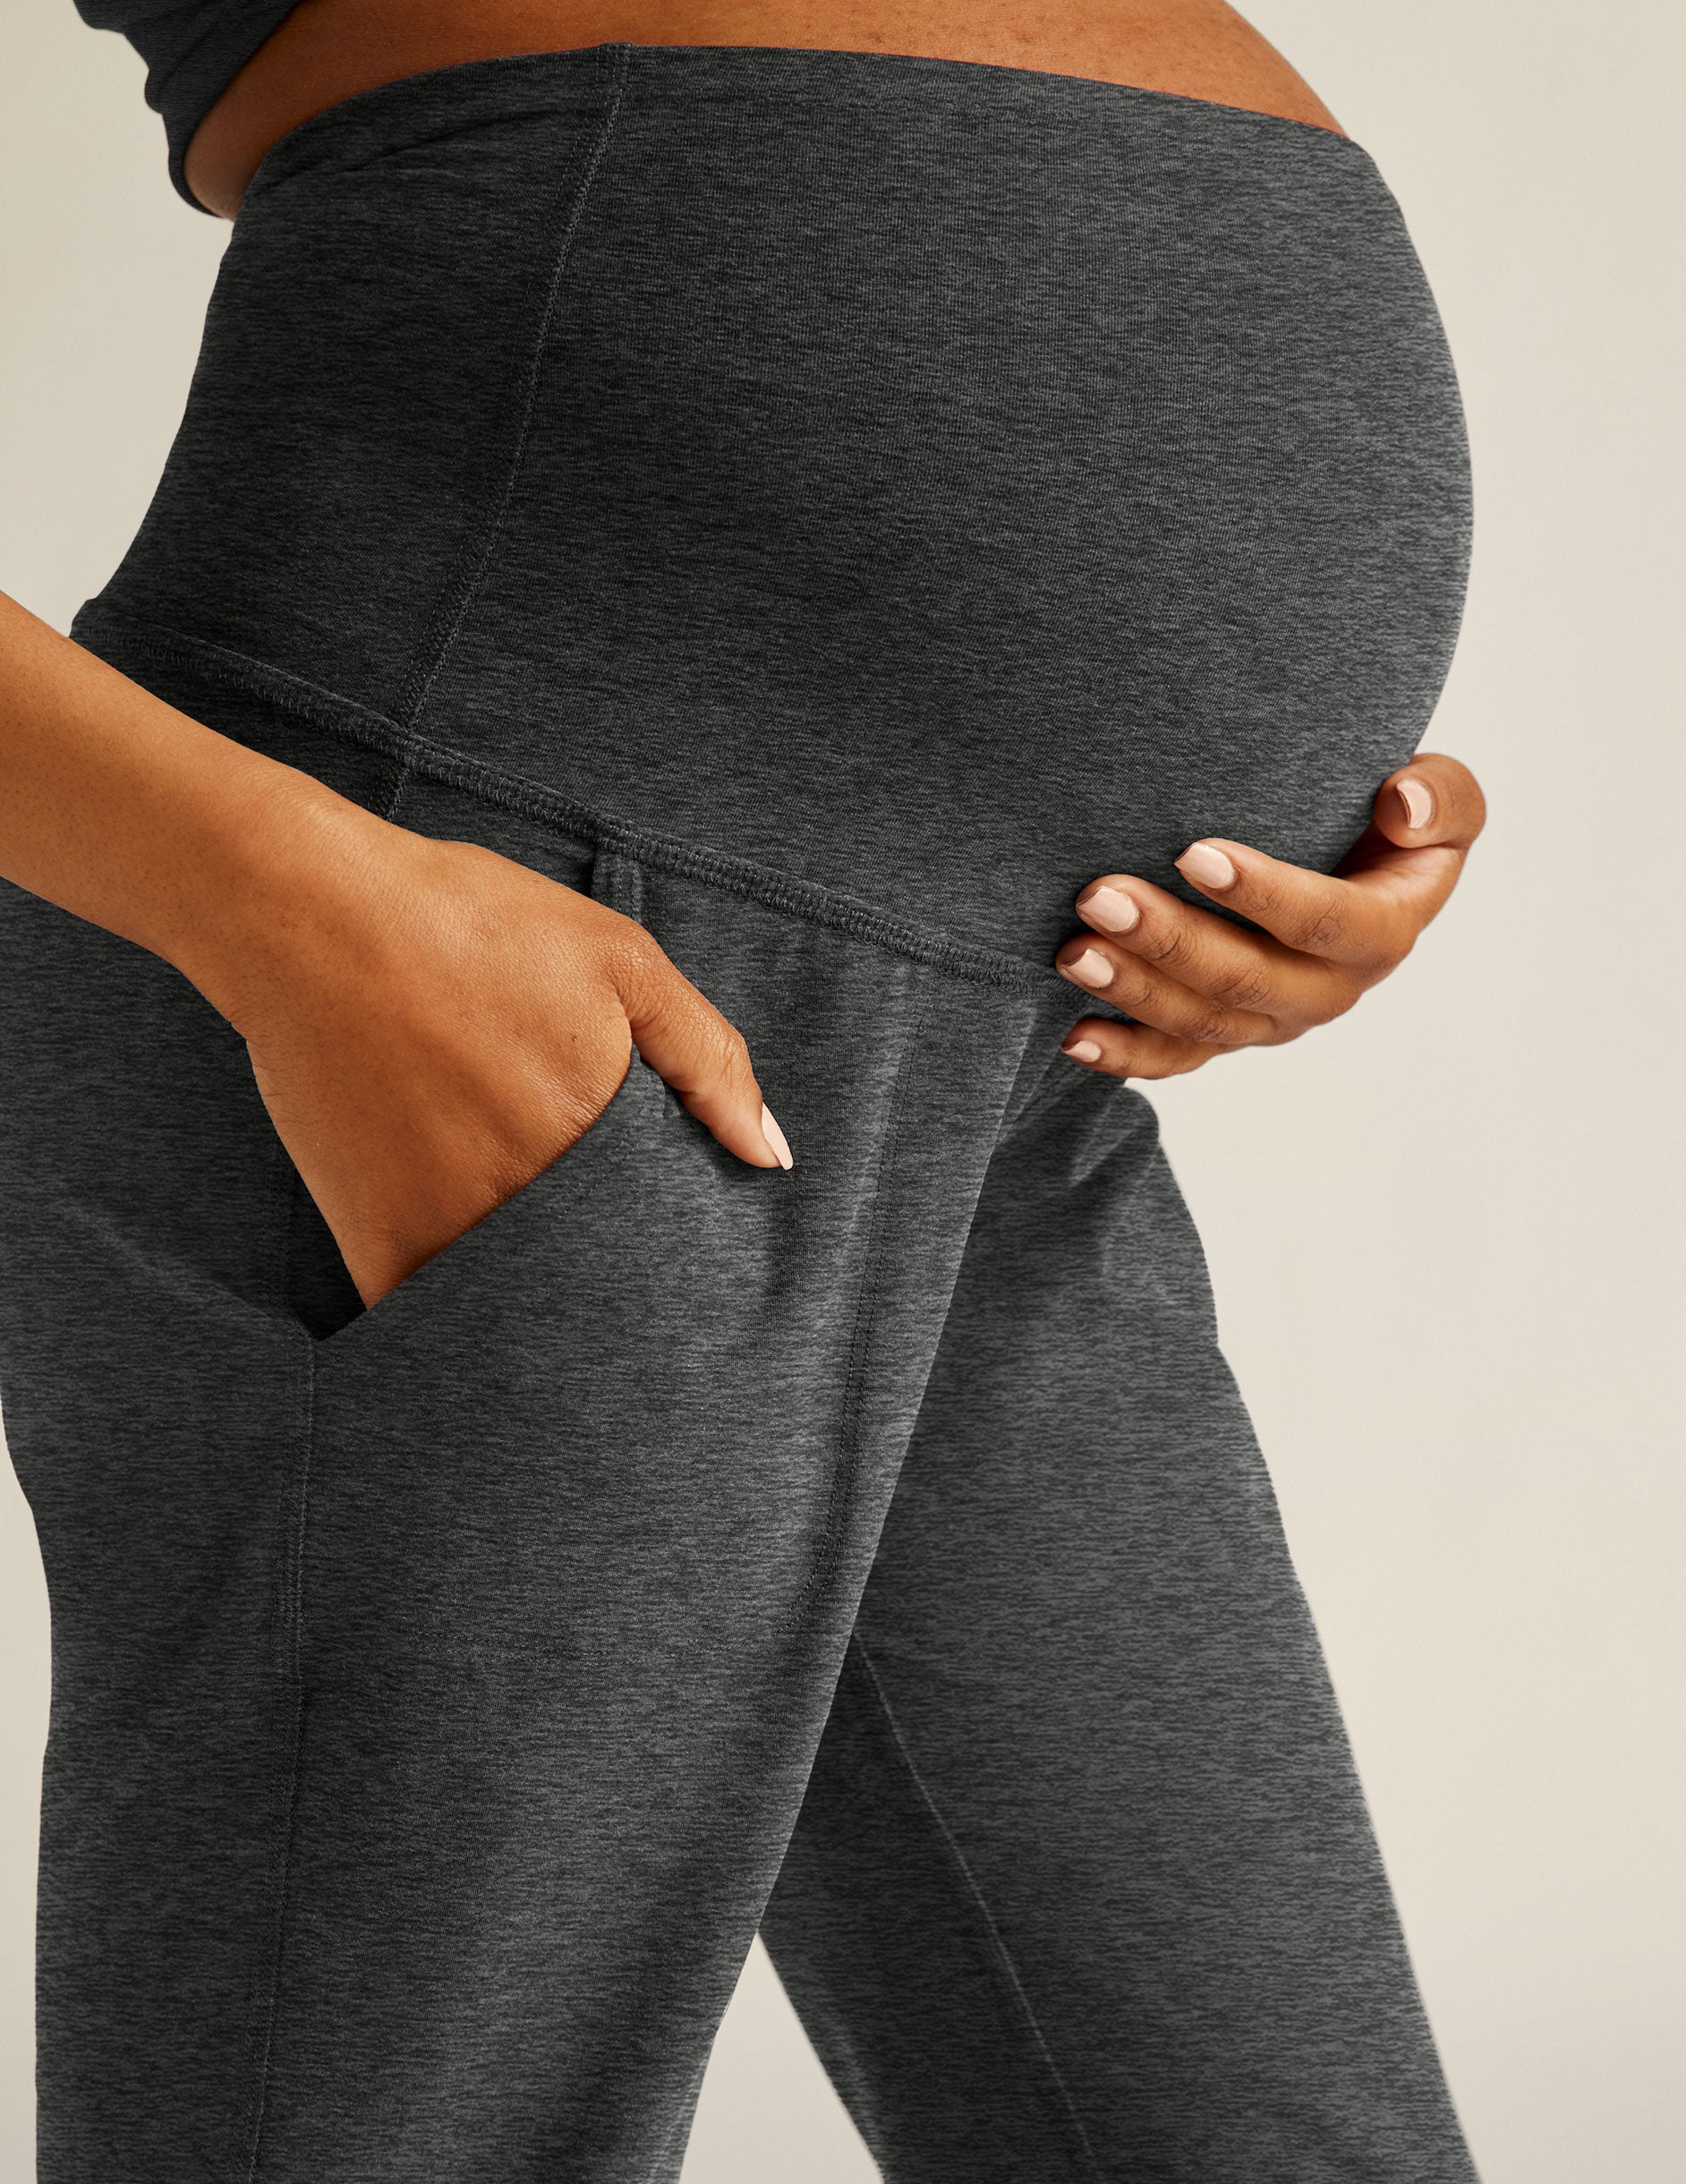 V VOCNI Women's Maternity Pants Maternity Activewear Jogger Track Cuff  Sweatpants Over The Belly Stretchy Pregnancy Pants Black&Black,Small at   Women's Clothing store